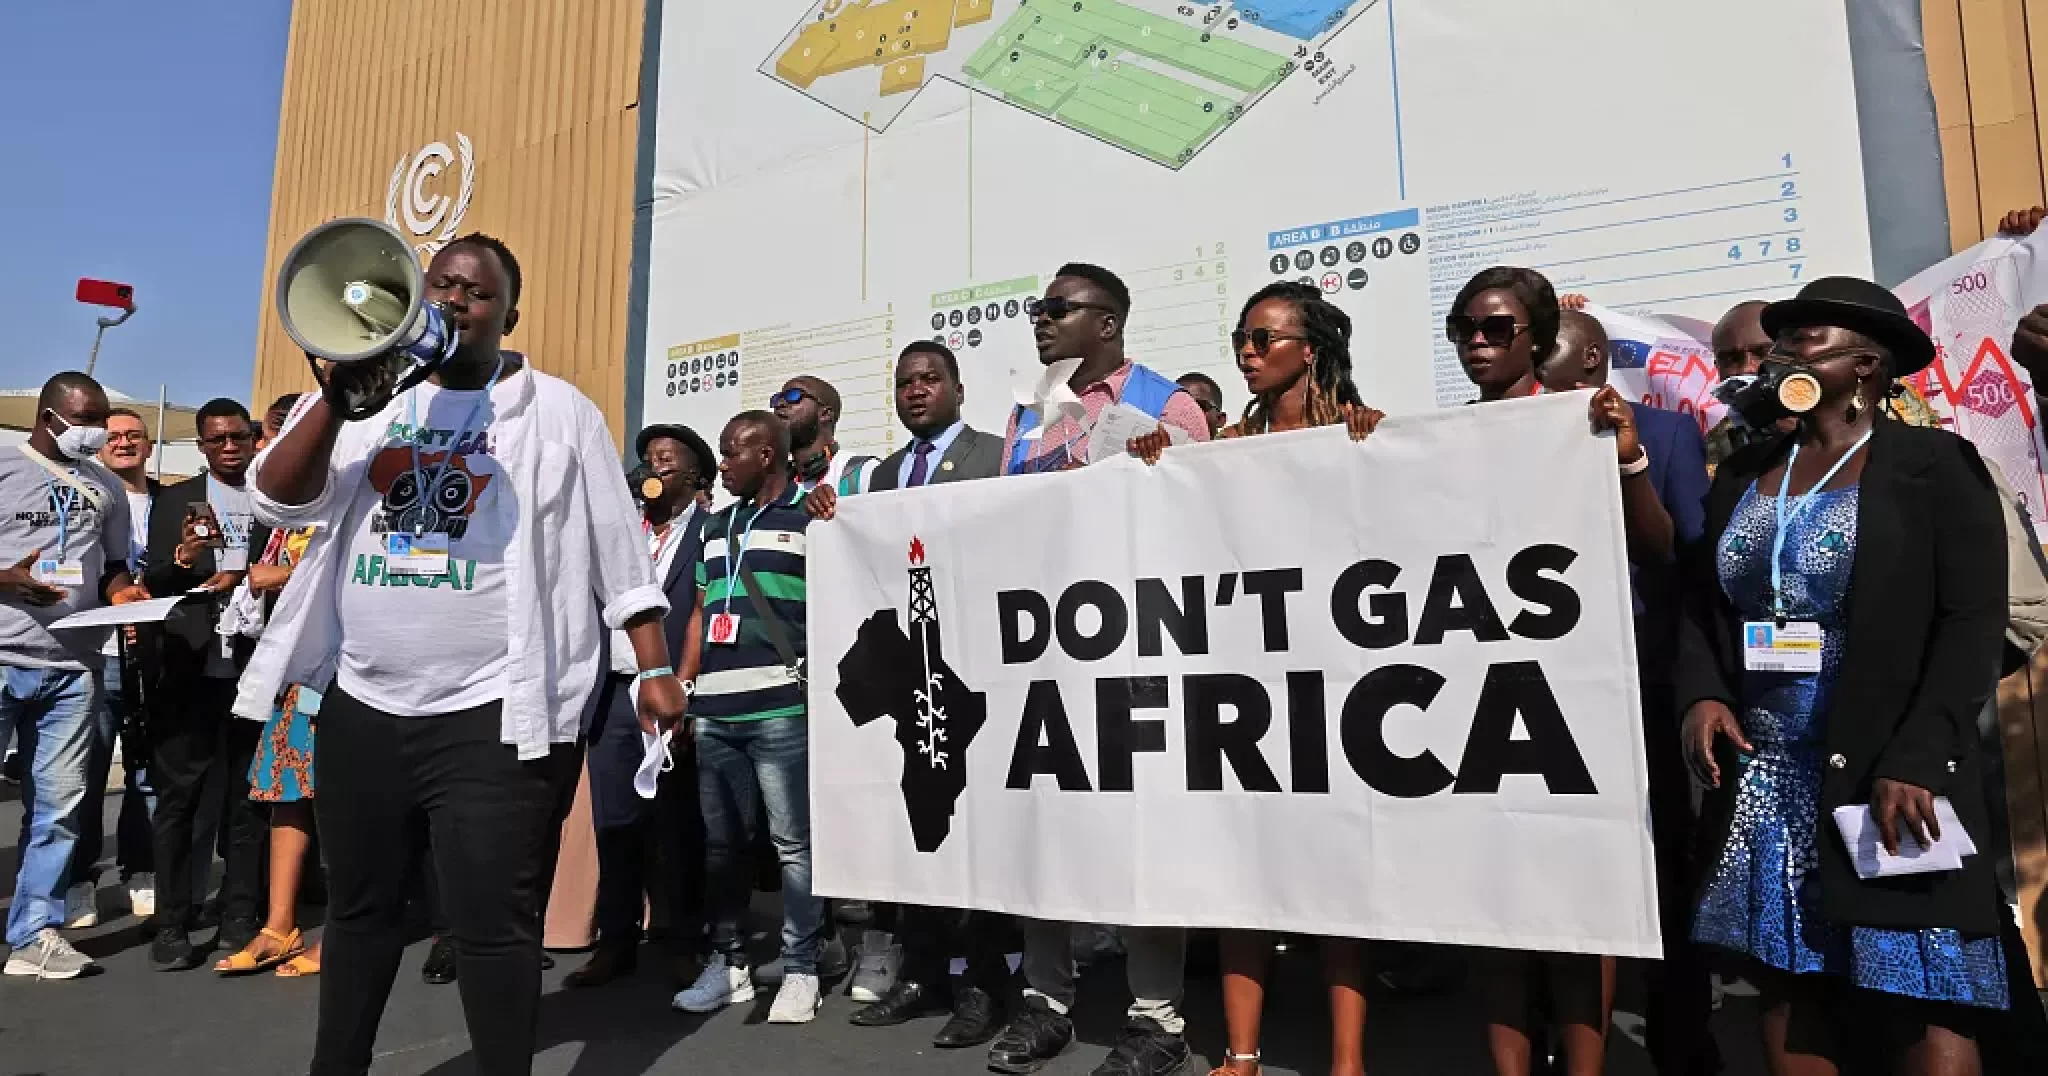 Climate activists call on countries to stop funding new gas projects in Africa